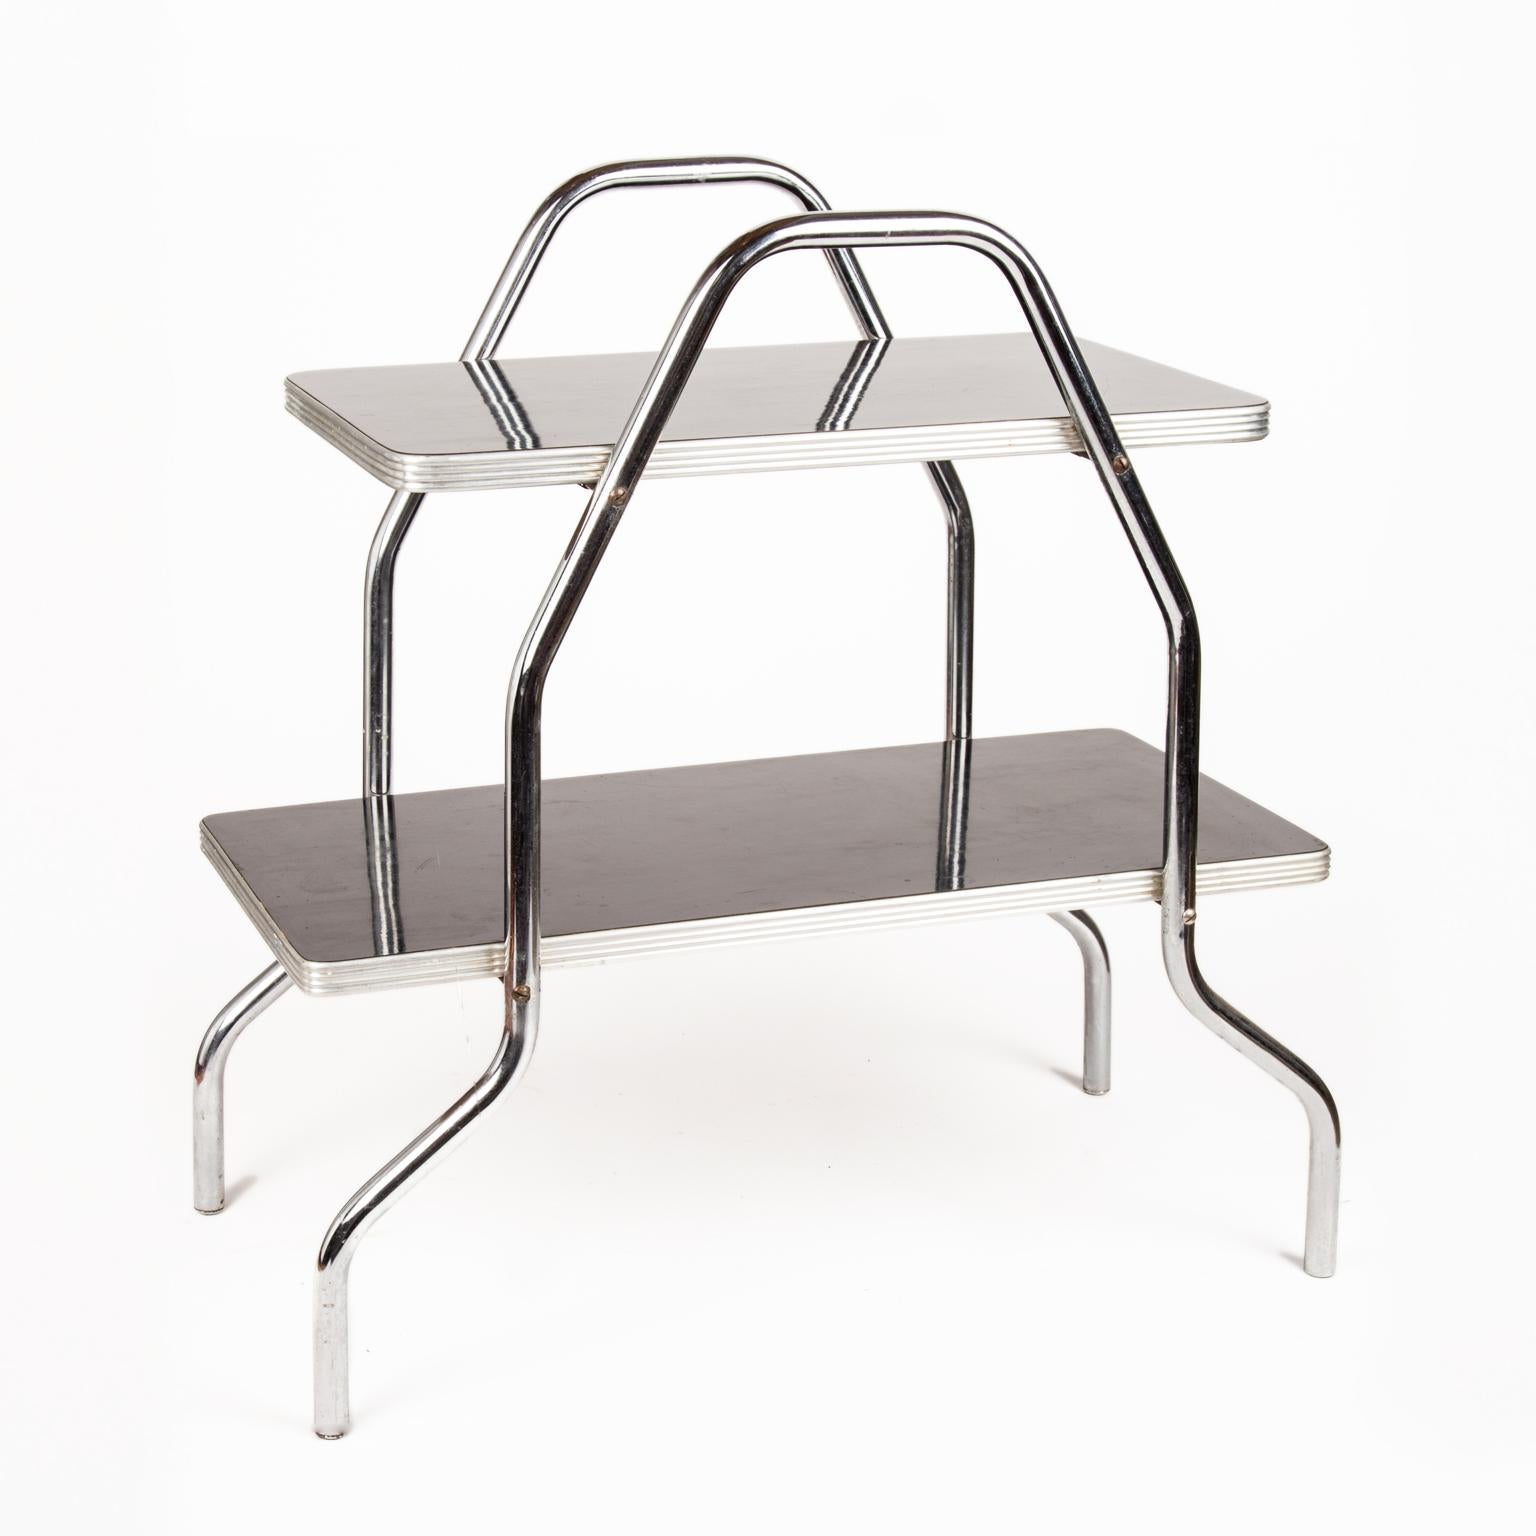 Art Deco Machine Age black and chrome angular table after Wolfgang Hoffmann, Gilbert Rohde or Donald Deskey. The top is smaller and graduates to a larger size on the second tier, circa 1940s.